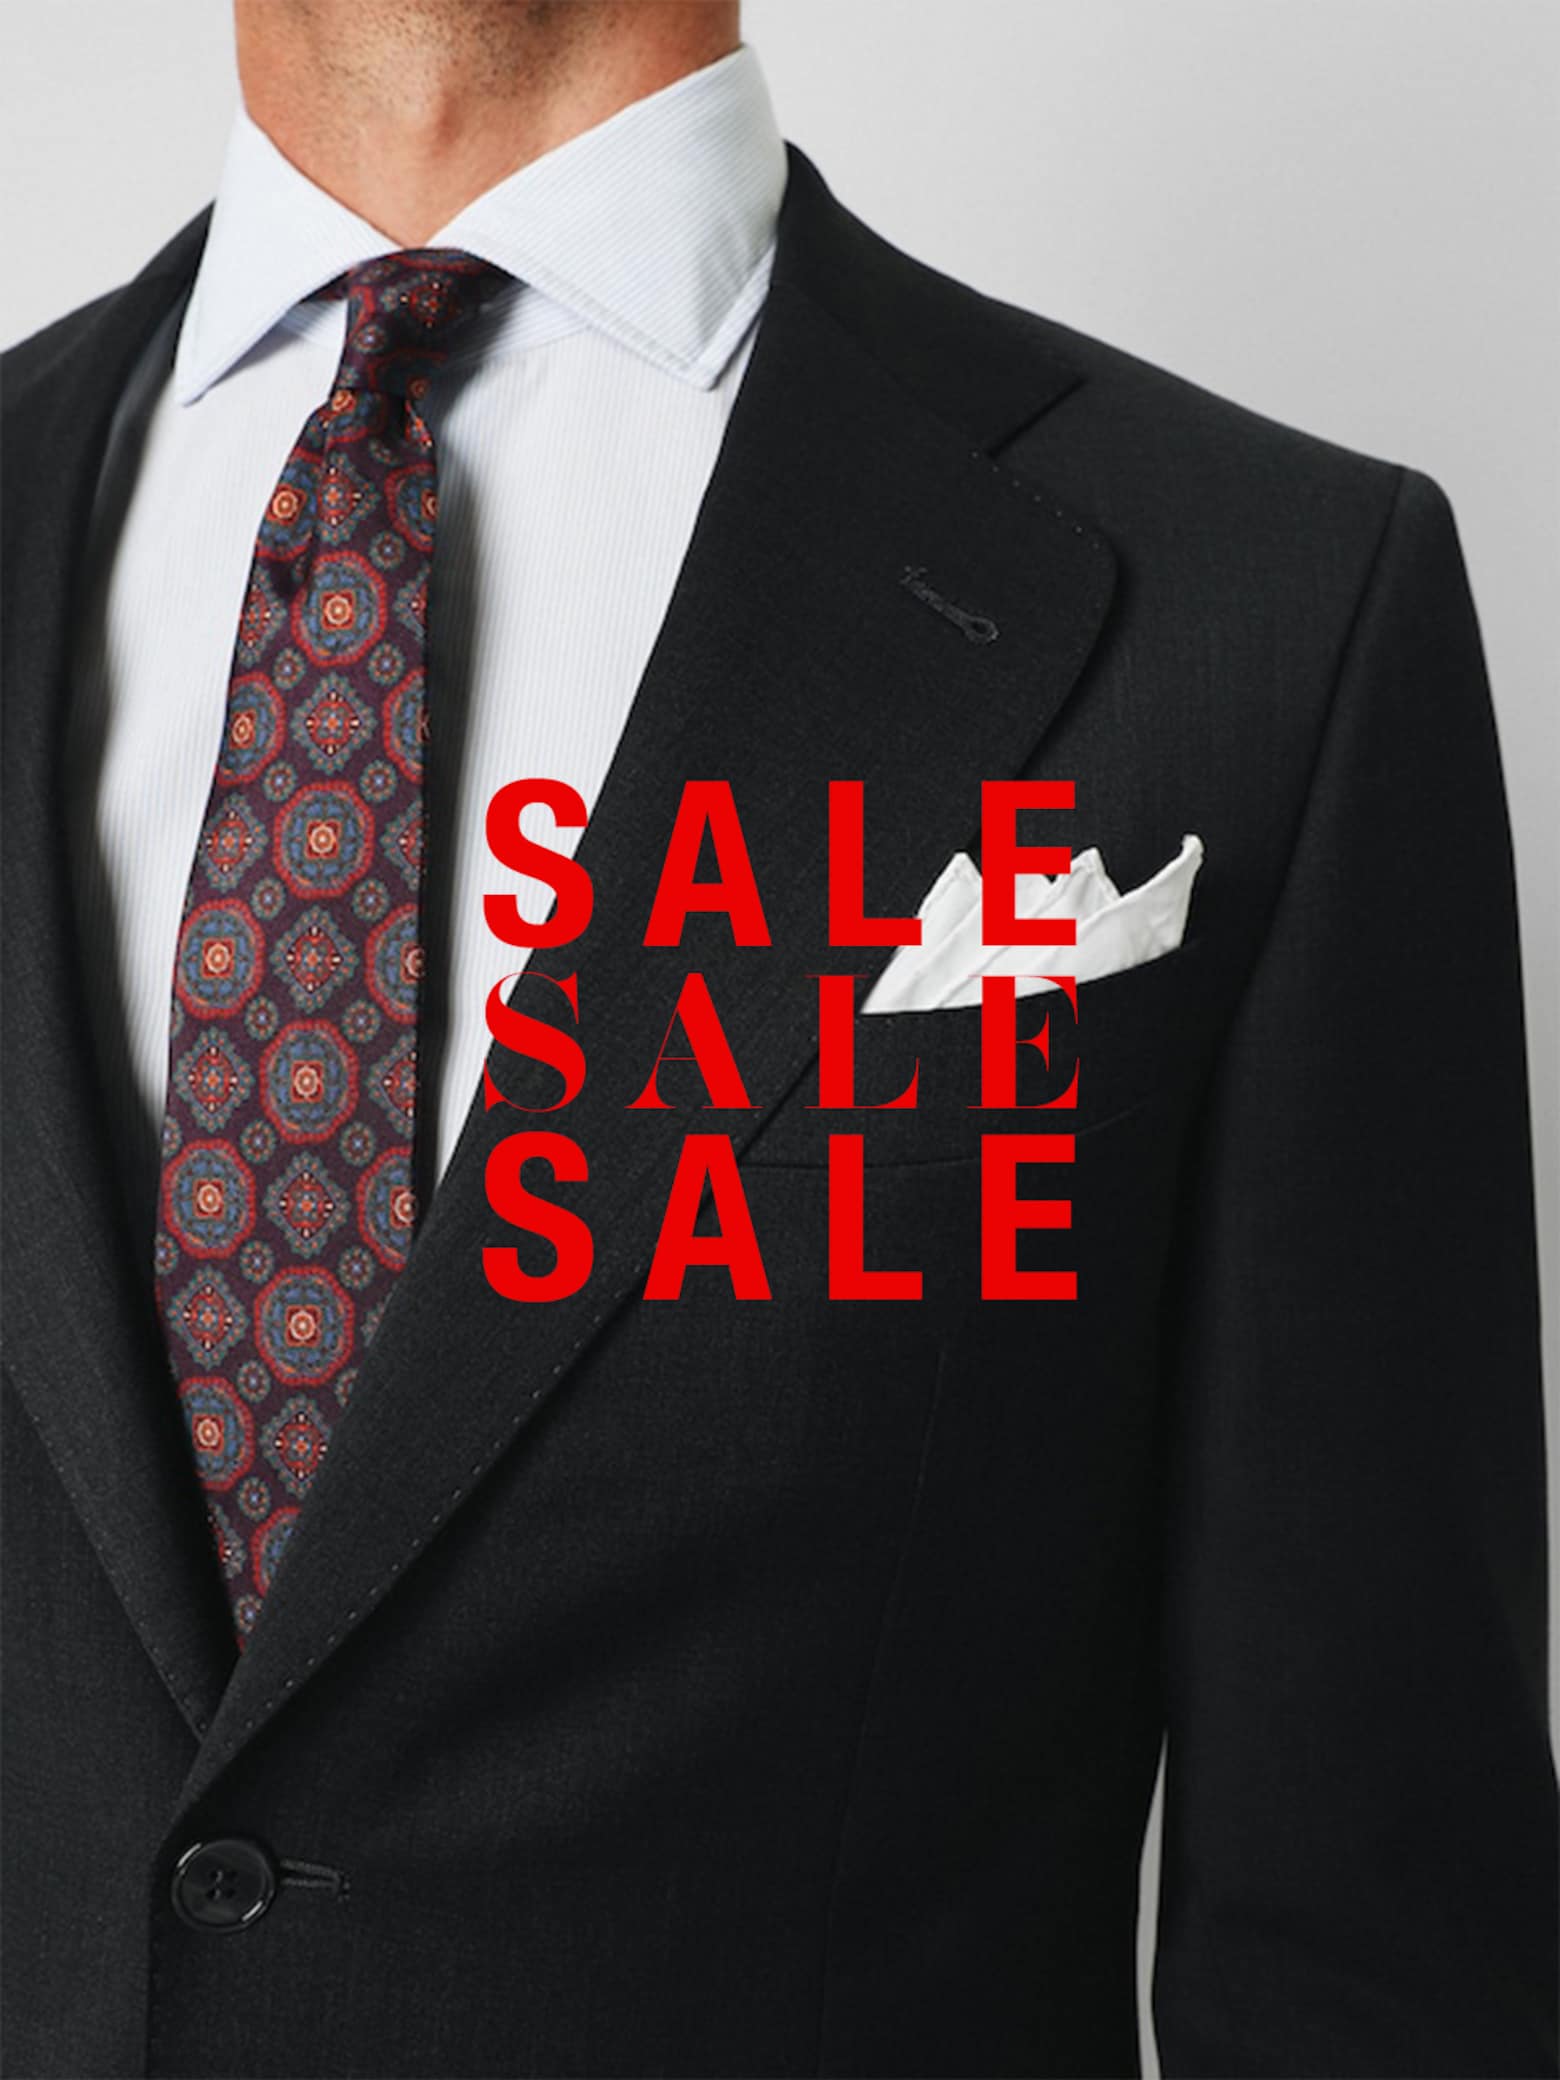 Save now! Suits